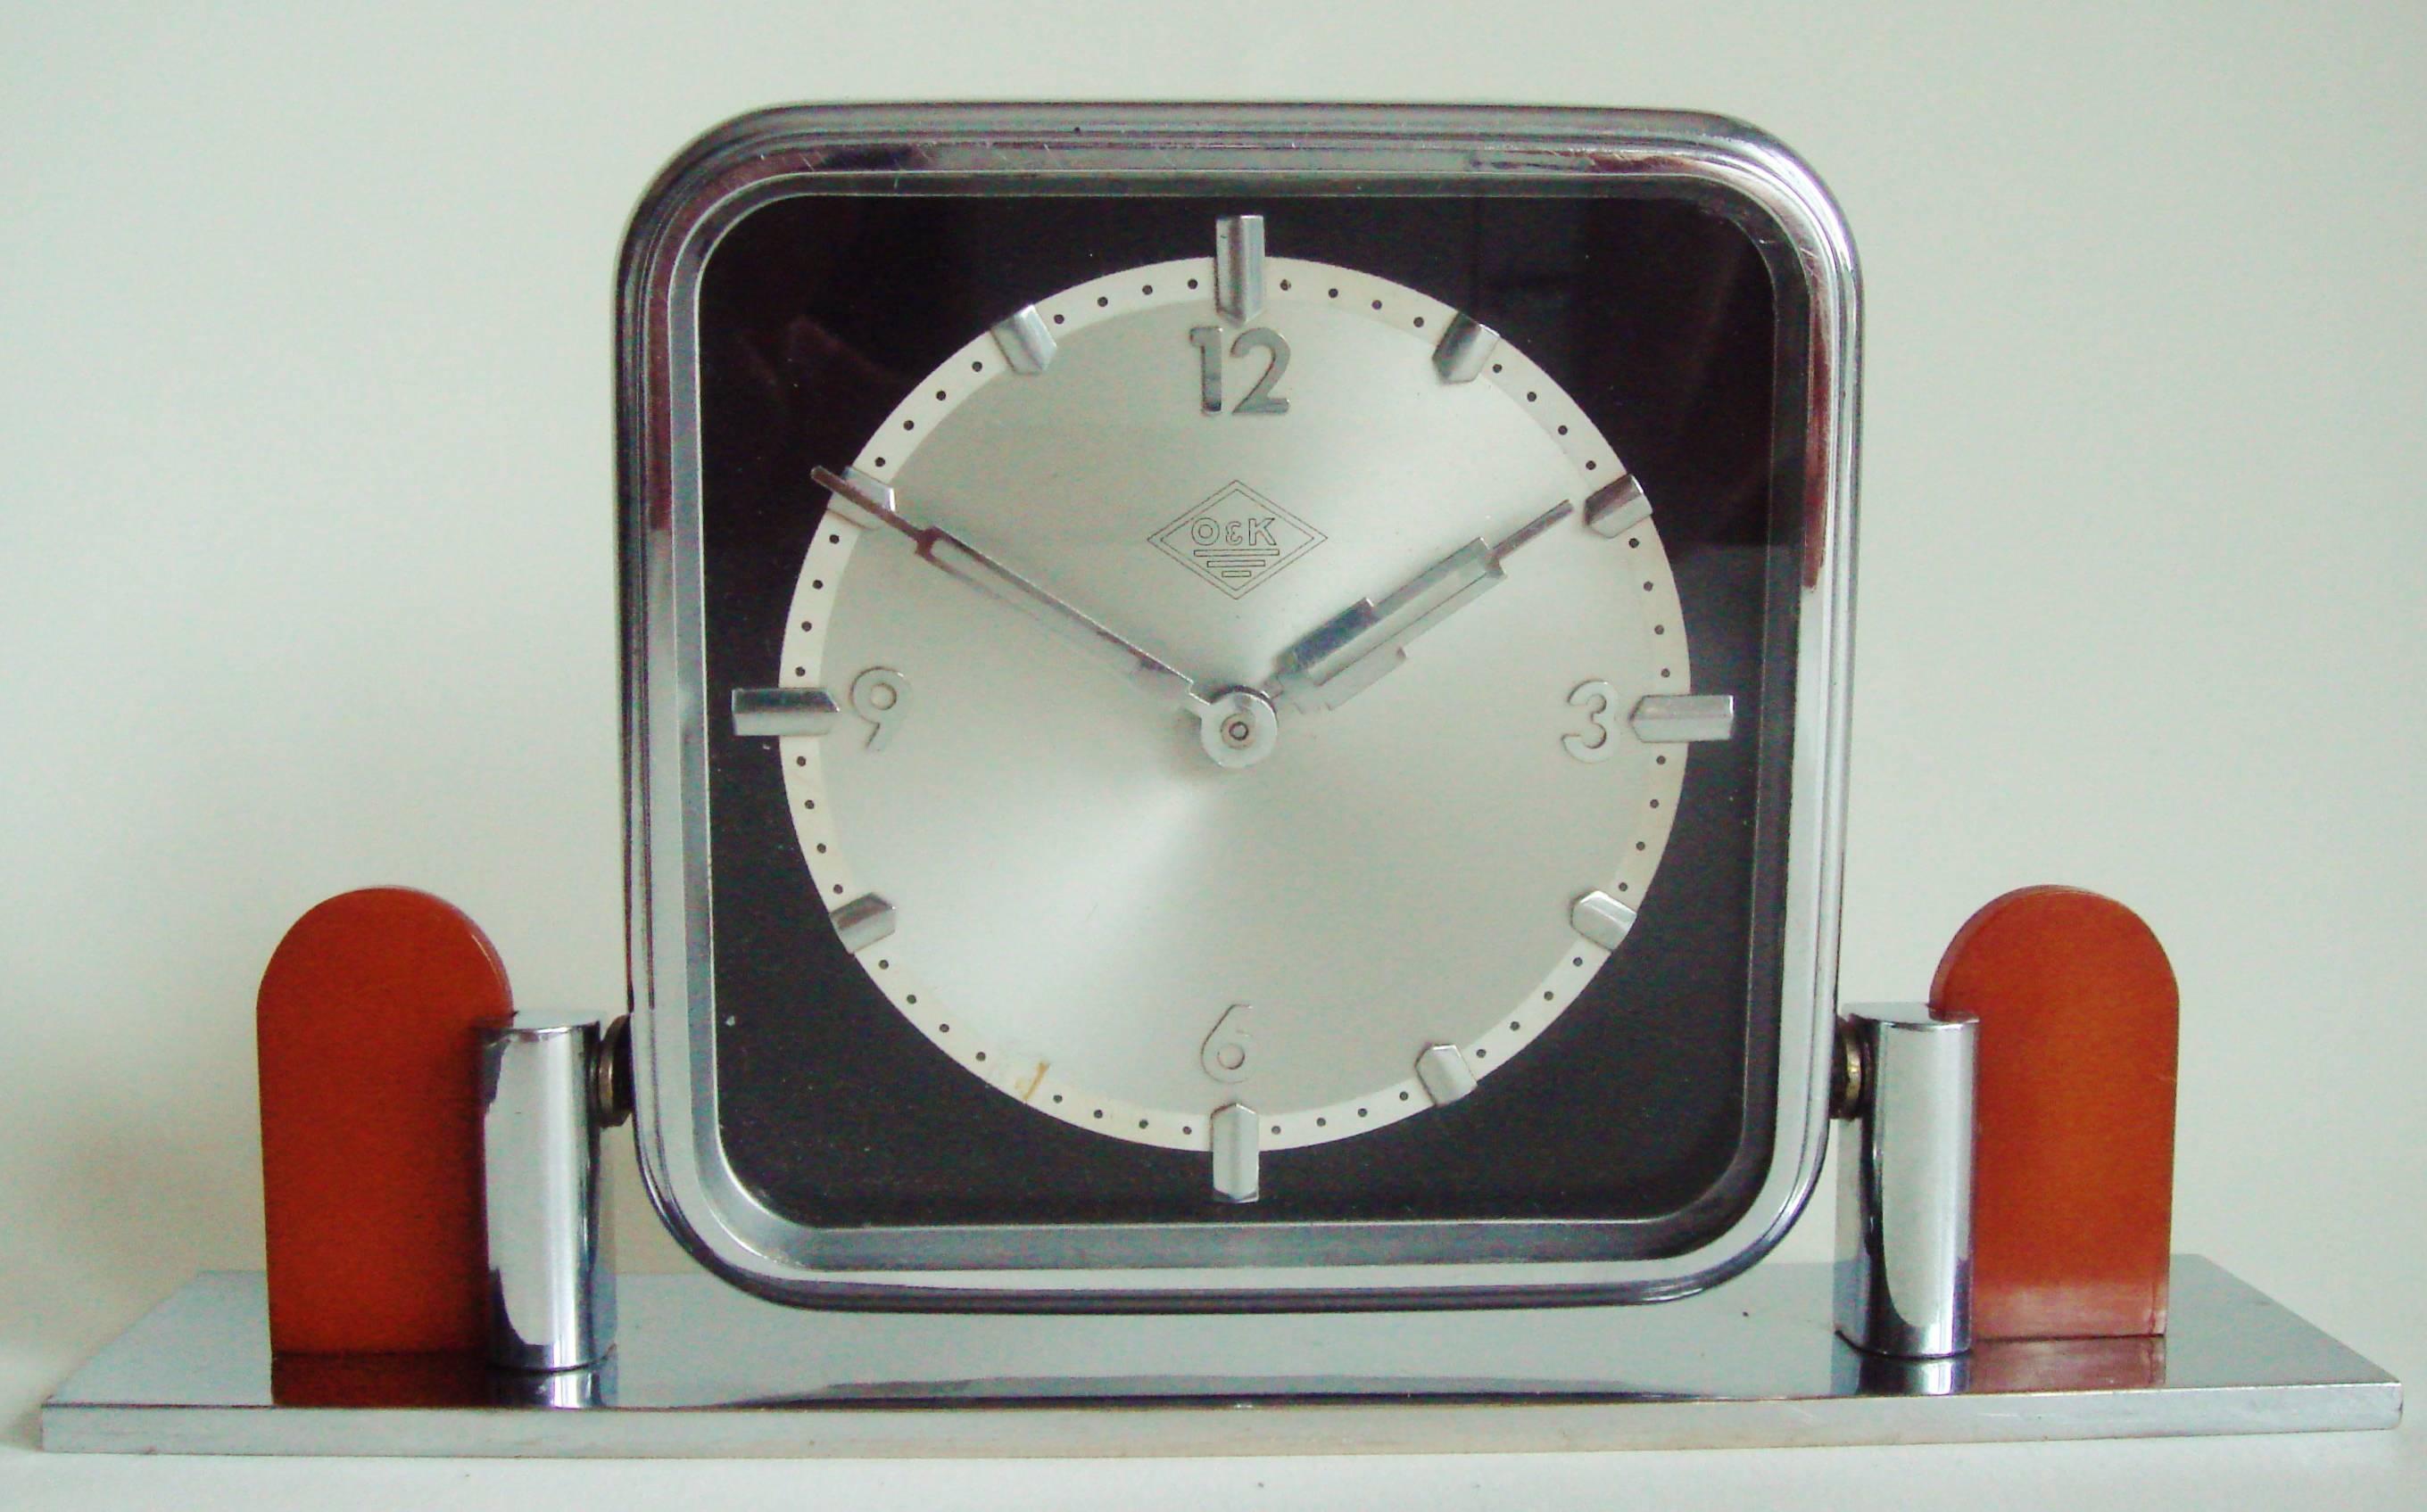 This German Art Deco tilting chrome and bakelite mechanical table clock was a presentation piece from the German heavy goods and engineering company of Orenstein & Koppel and bears their inter-war logo to the face. In 1935 as part of Hitler's